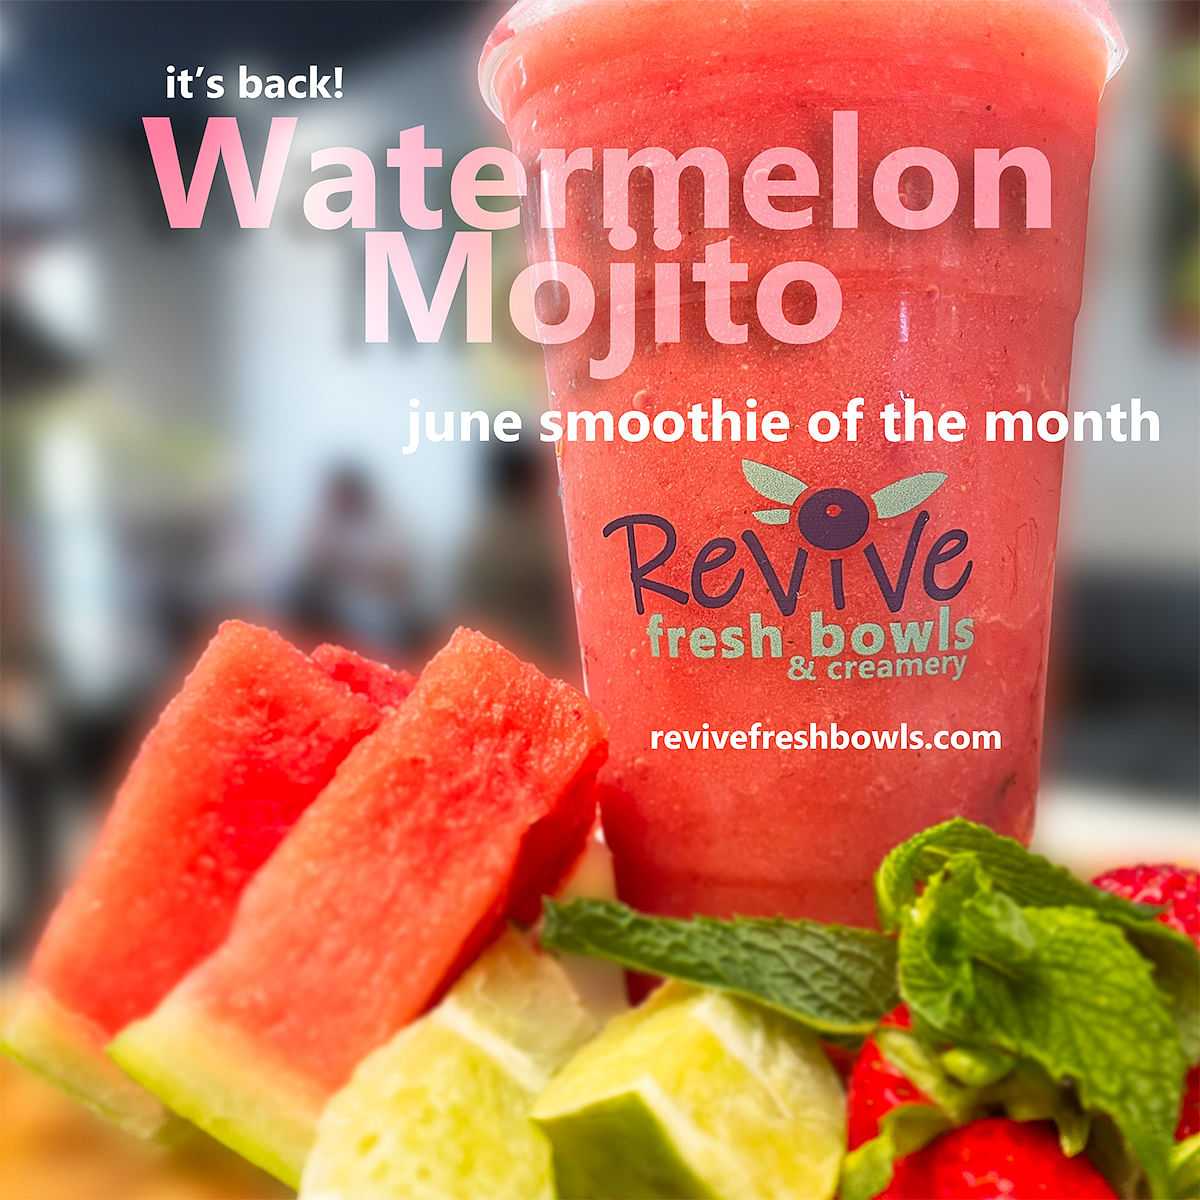 Watermelon Mojito smoothie with watermelon and lime slices, June special at Revive Fresh Bowls.